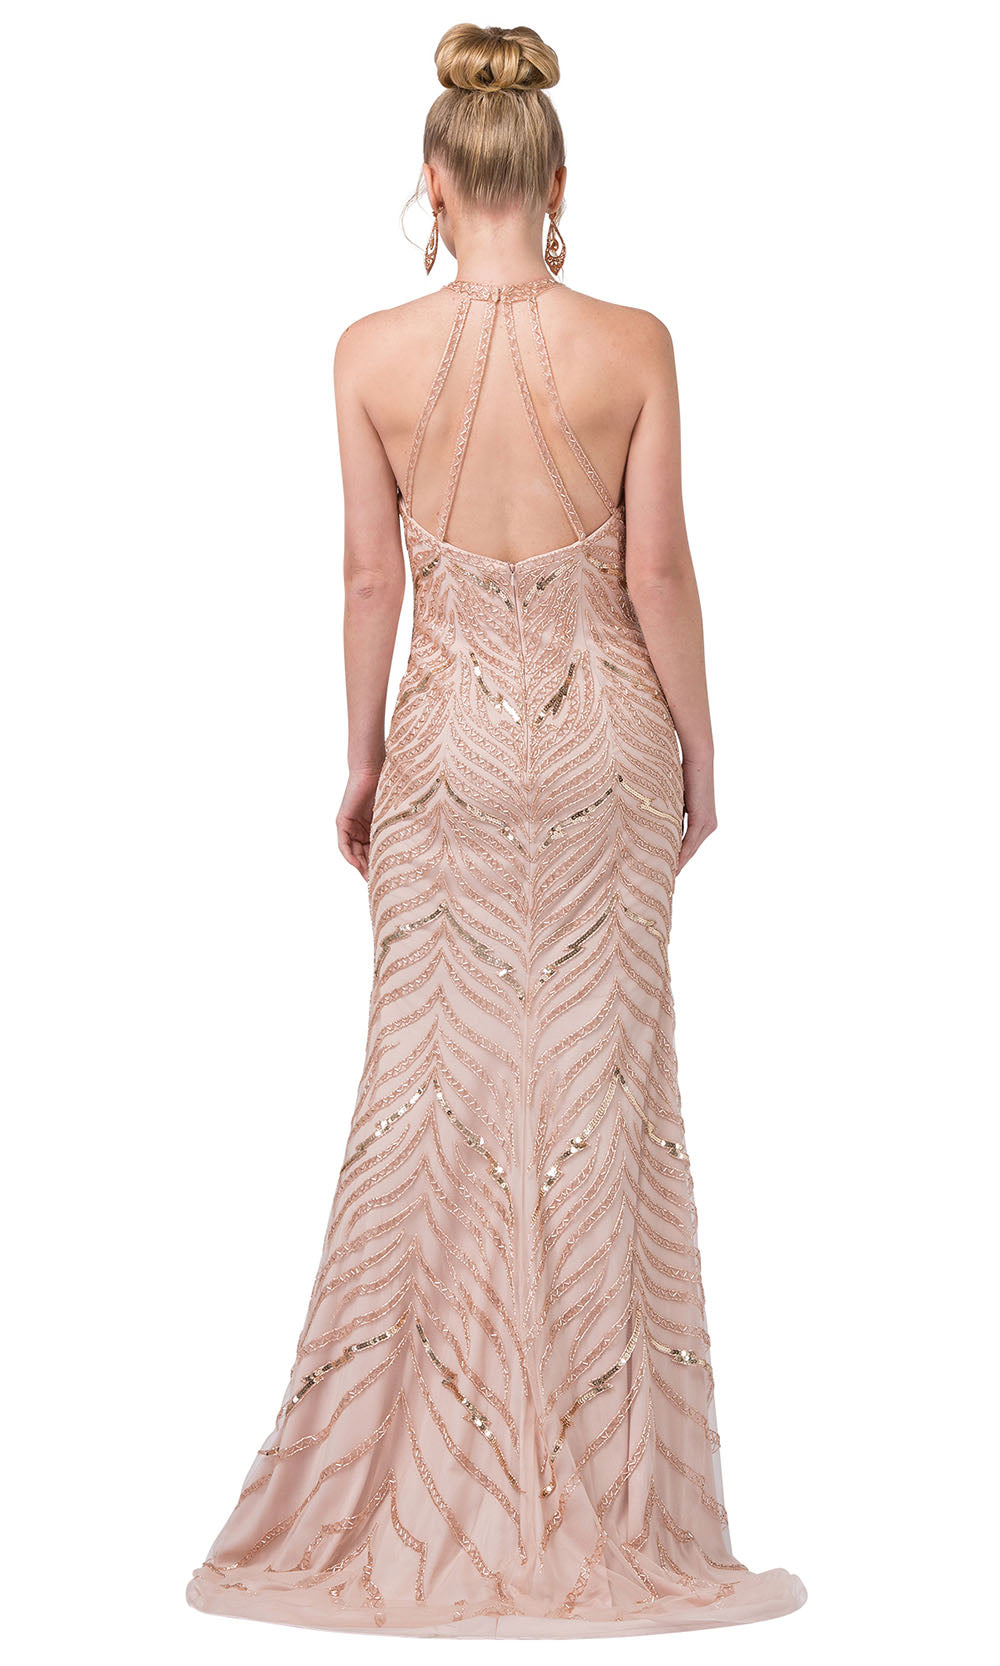 Dancing Queen - 2616 Strappy Back Embellished Column In Pink and Gold